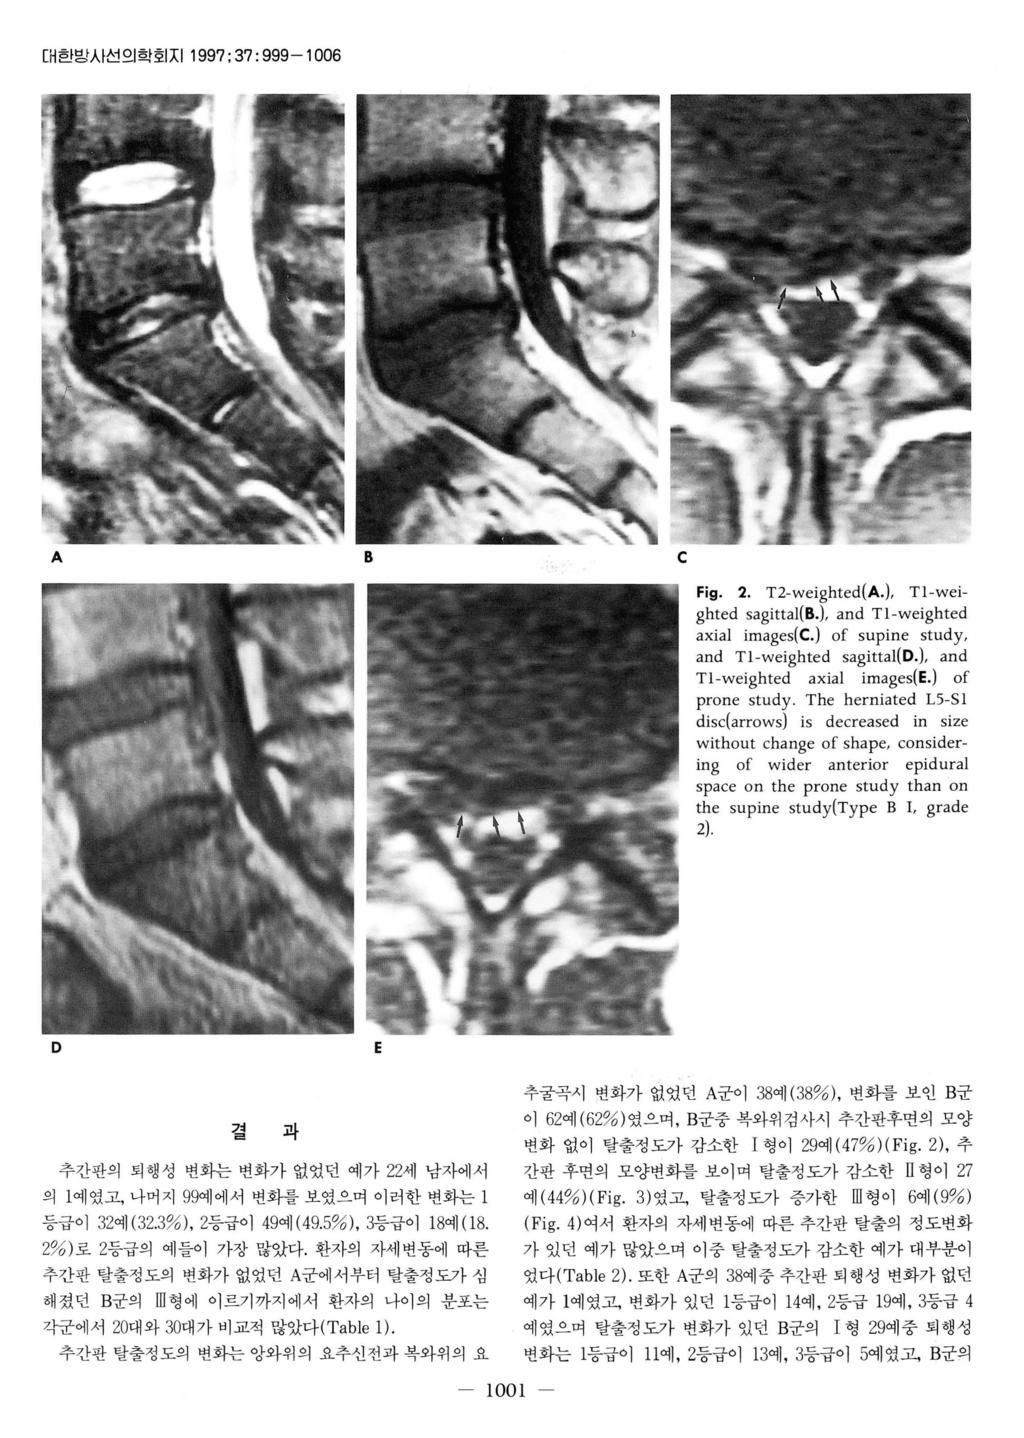 [H 한발시선의학호 지 1997 ; 37: 999-1 006 A B c Fig. 2. T2-weighted(A.), Tl-wei ghted sagittal(b.), and Tl-weighted axial images(c.) of supine study, and Tl-weighted sagittal(d.